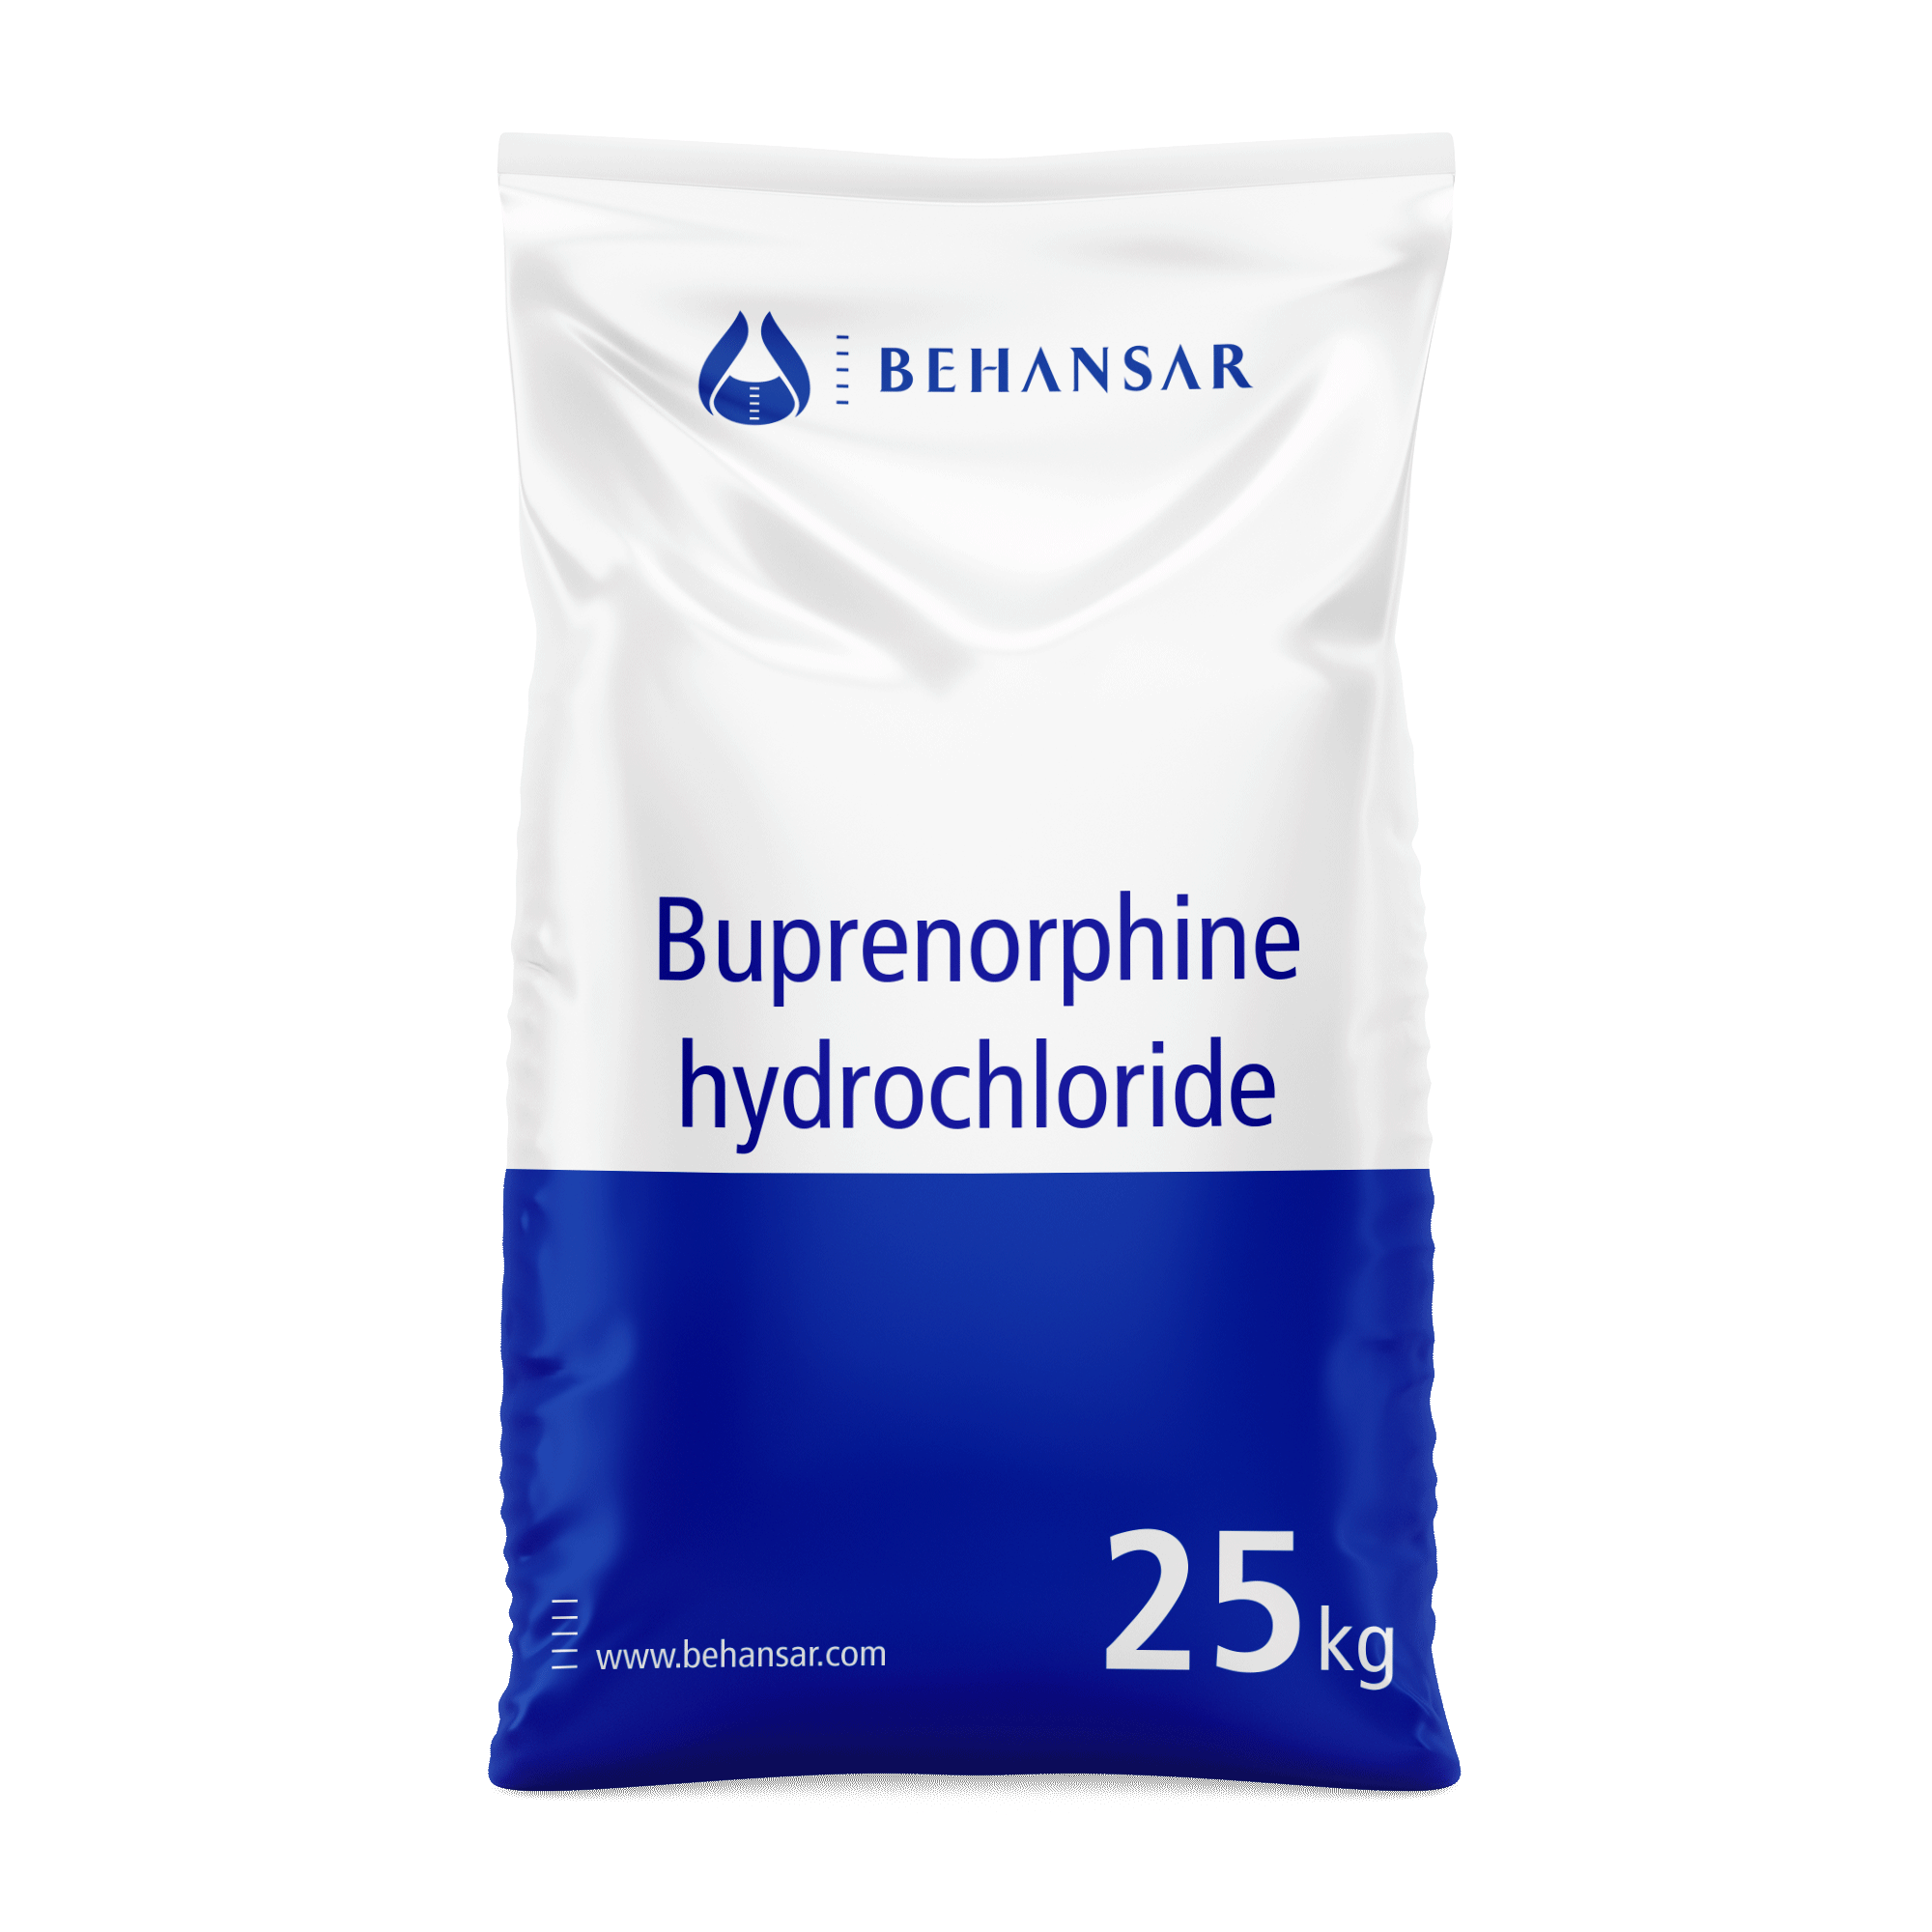 Buprenorphine hydrochloride is one of the products of Behansar Co